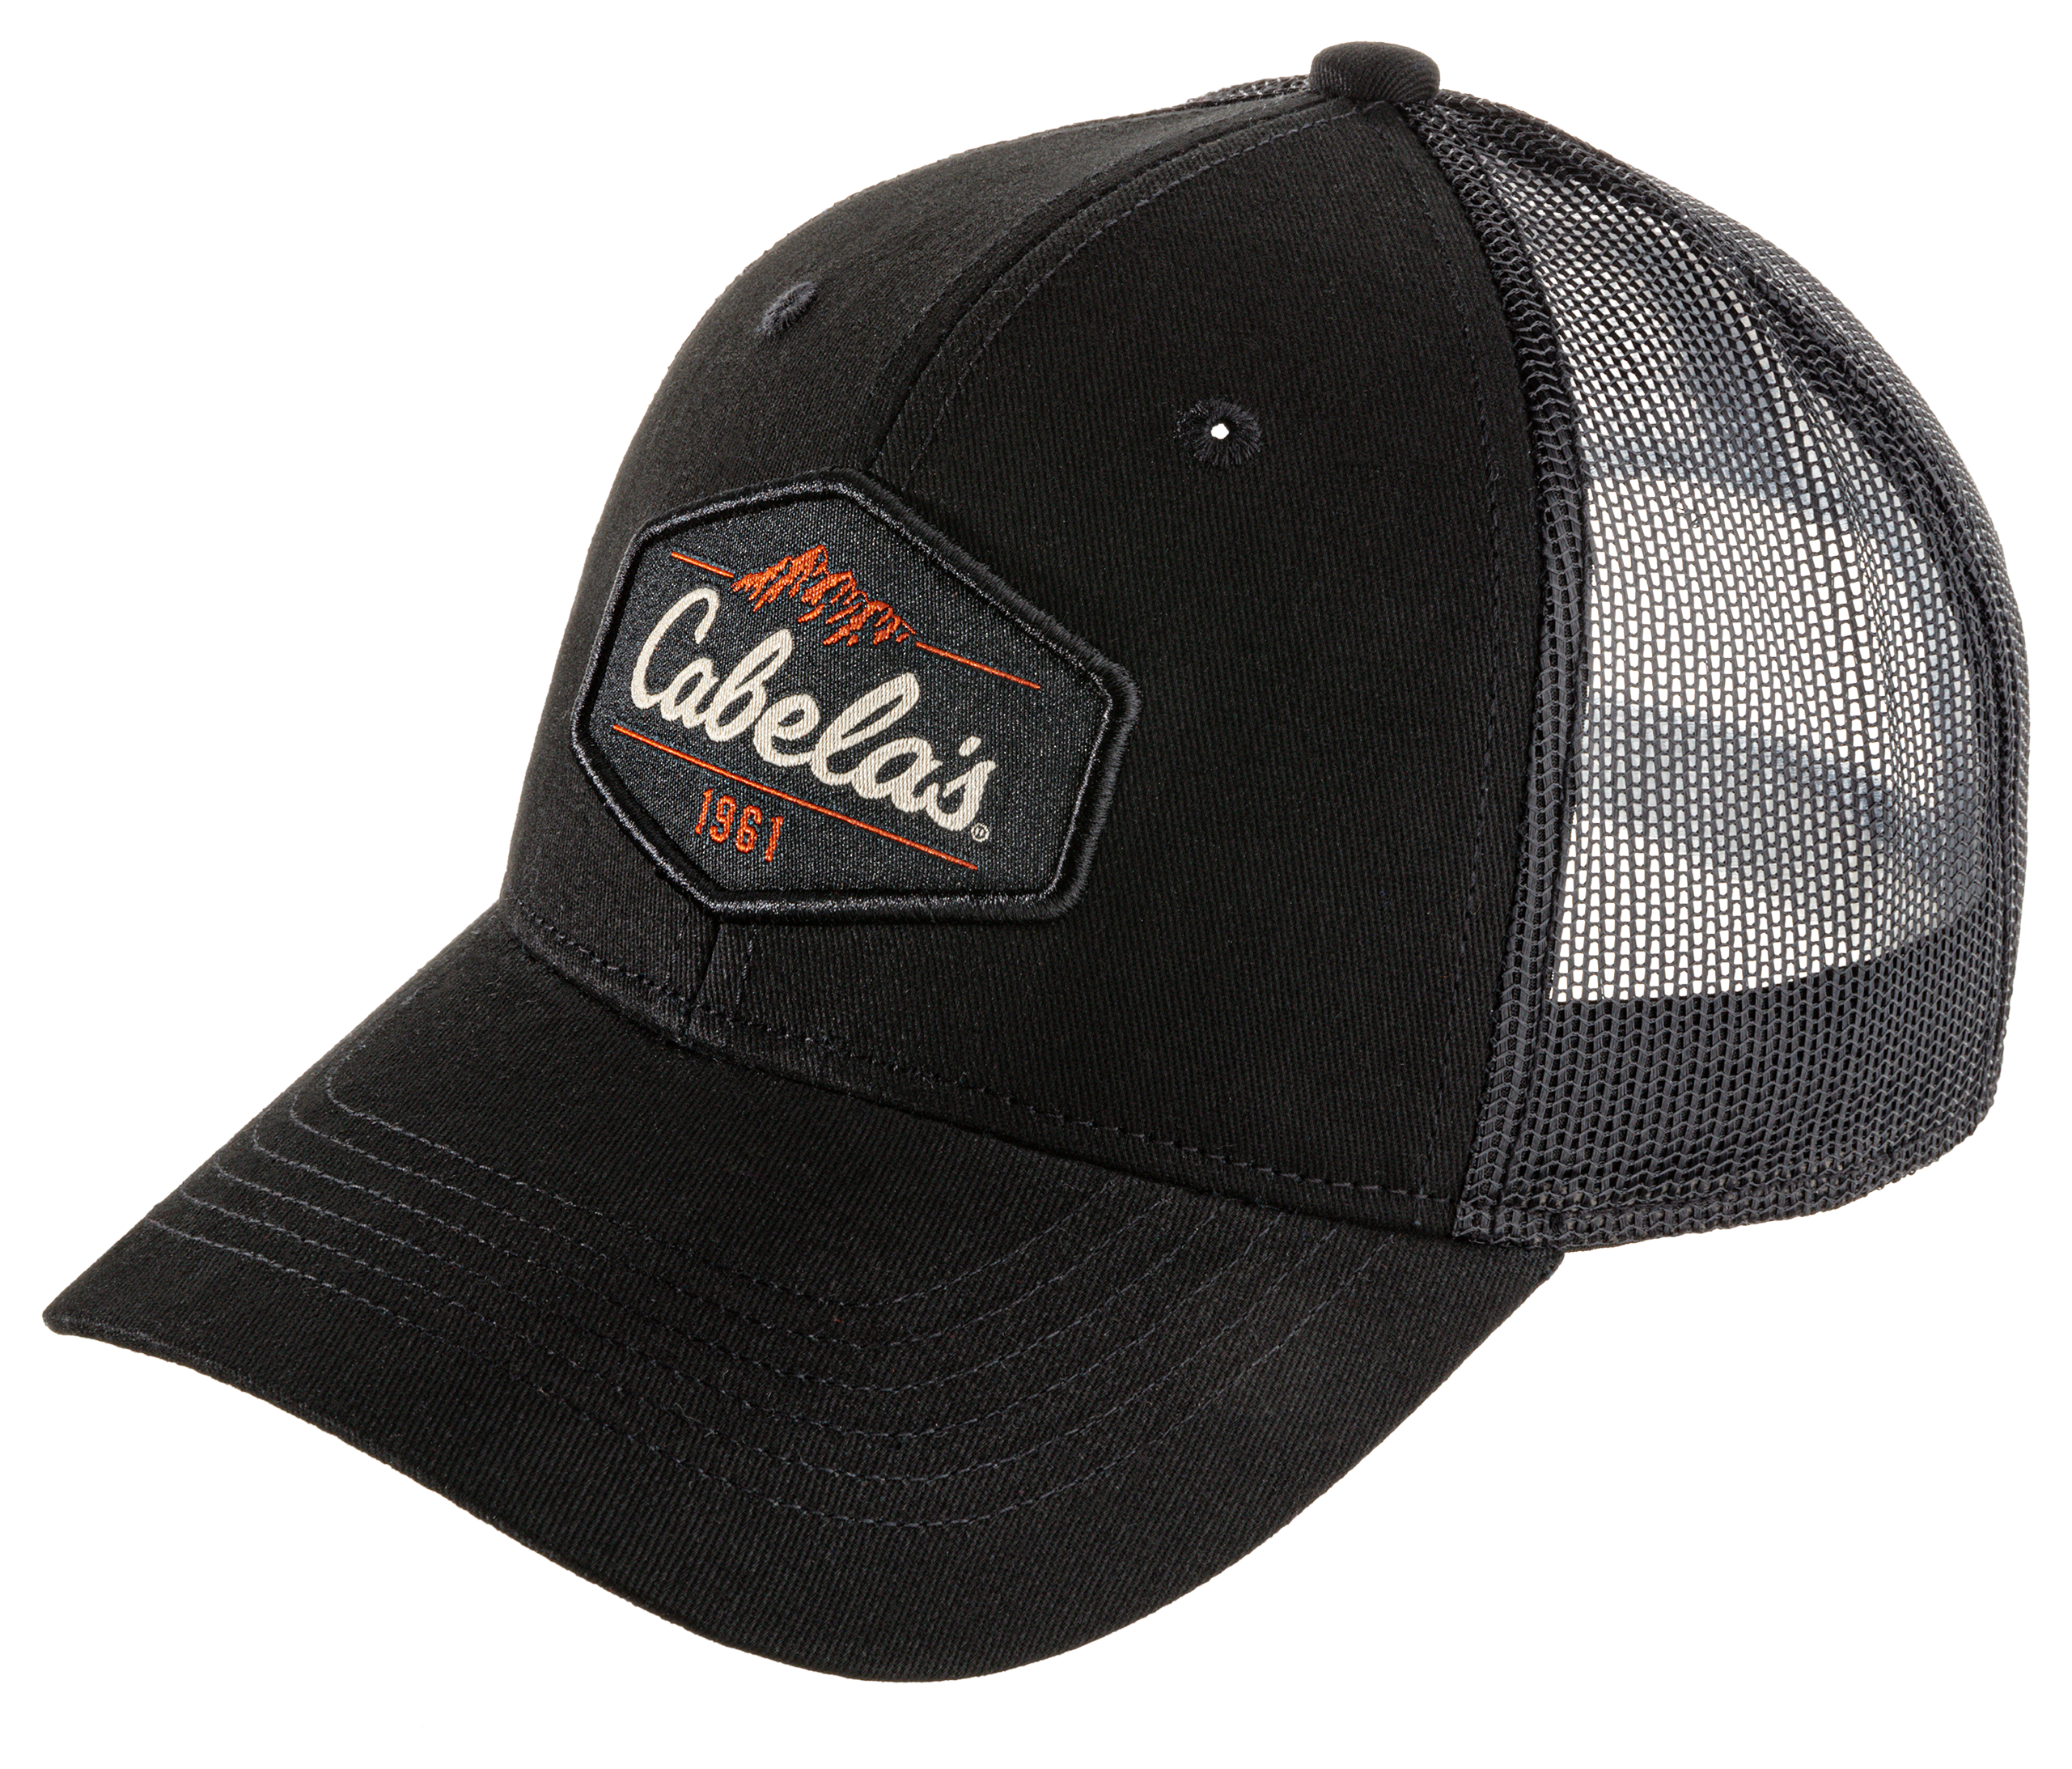 Bass Pro and Cabela's Hats and Caps